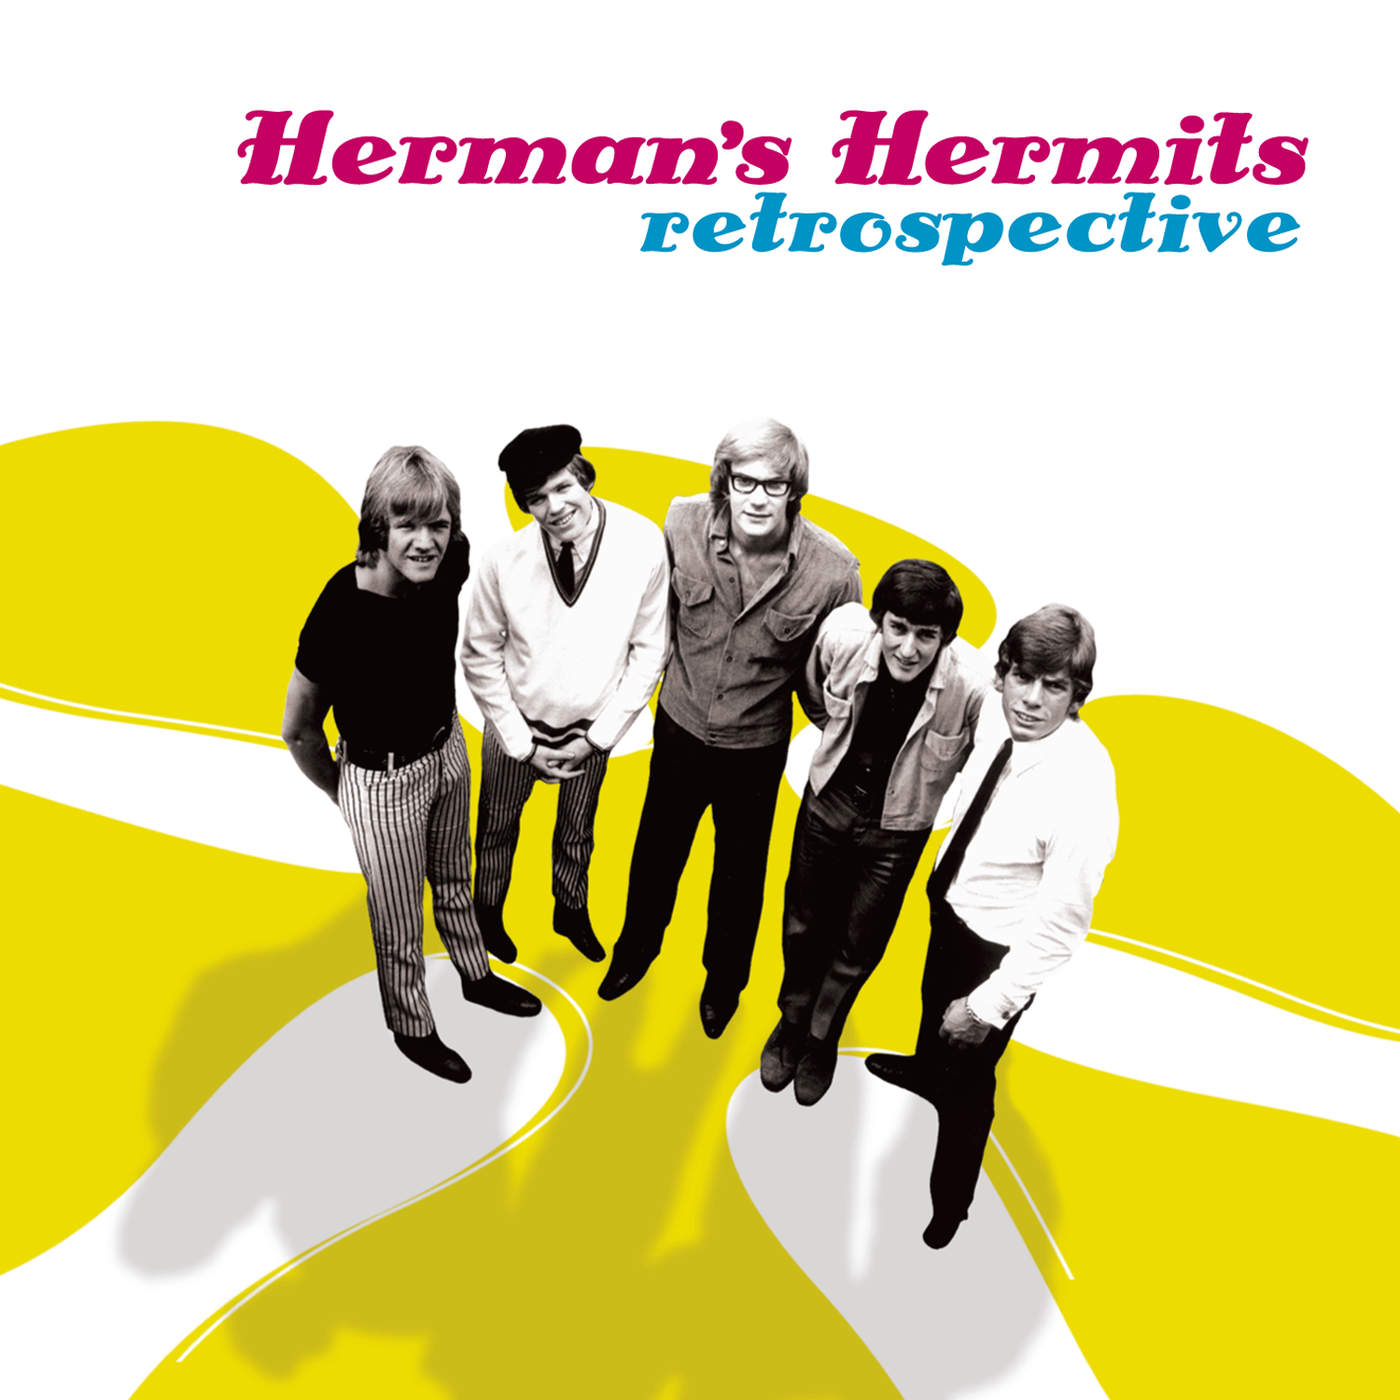 Art for I'm Into Something Good by Herman's Hermits